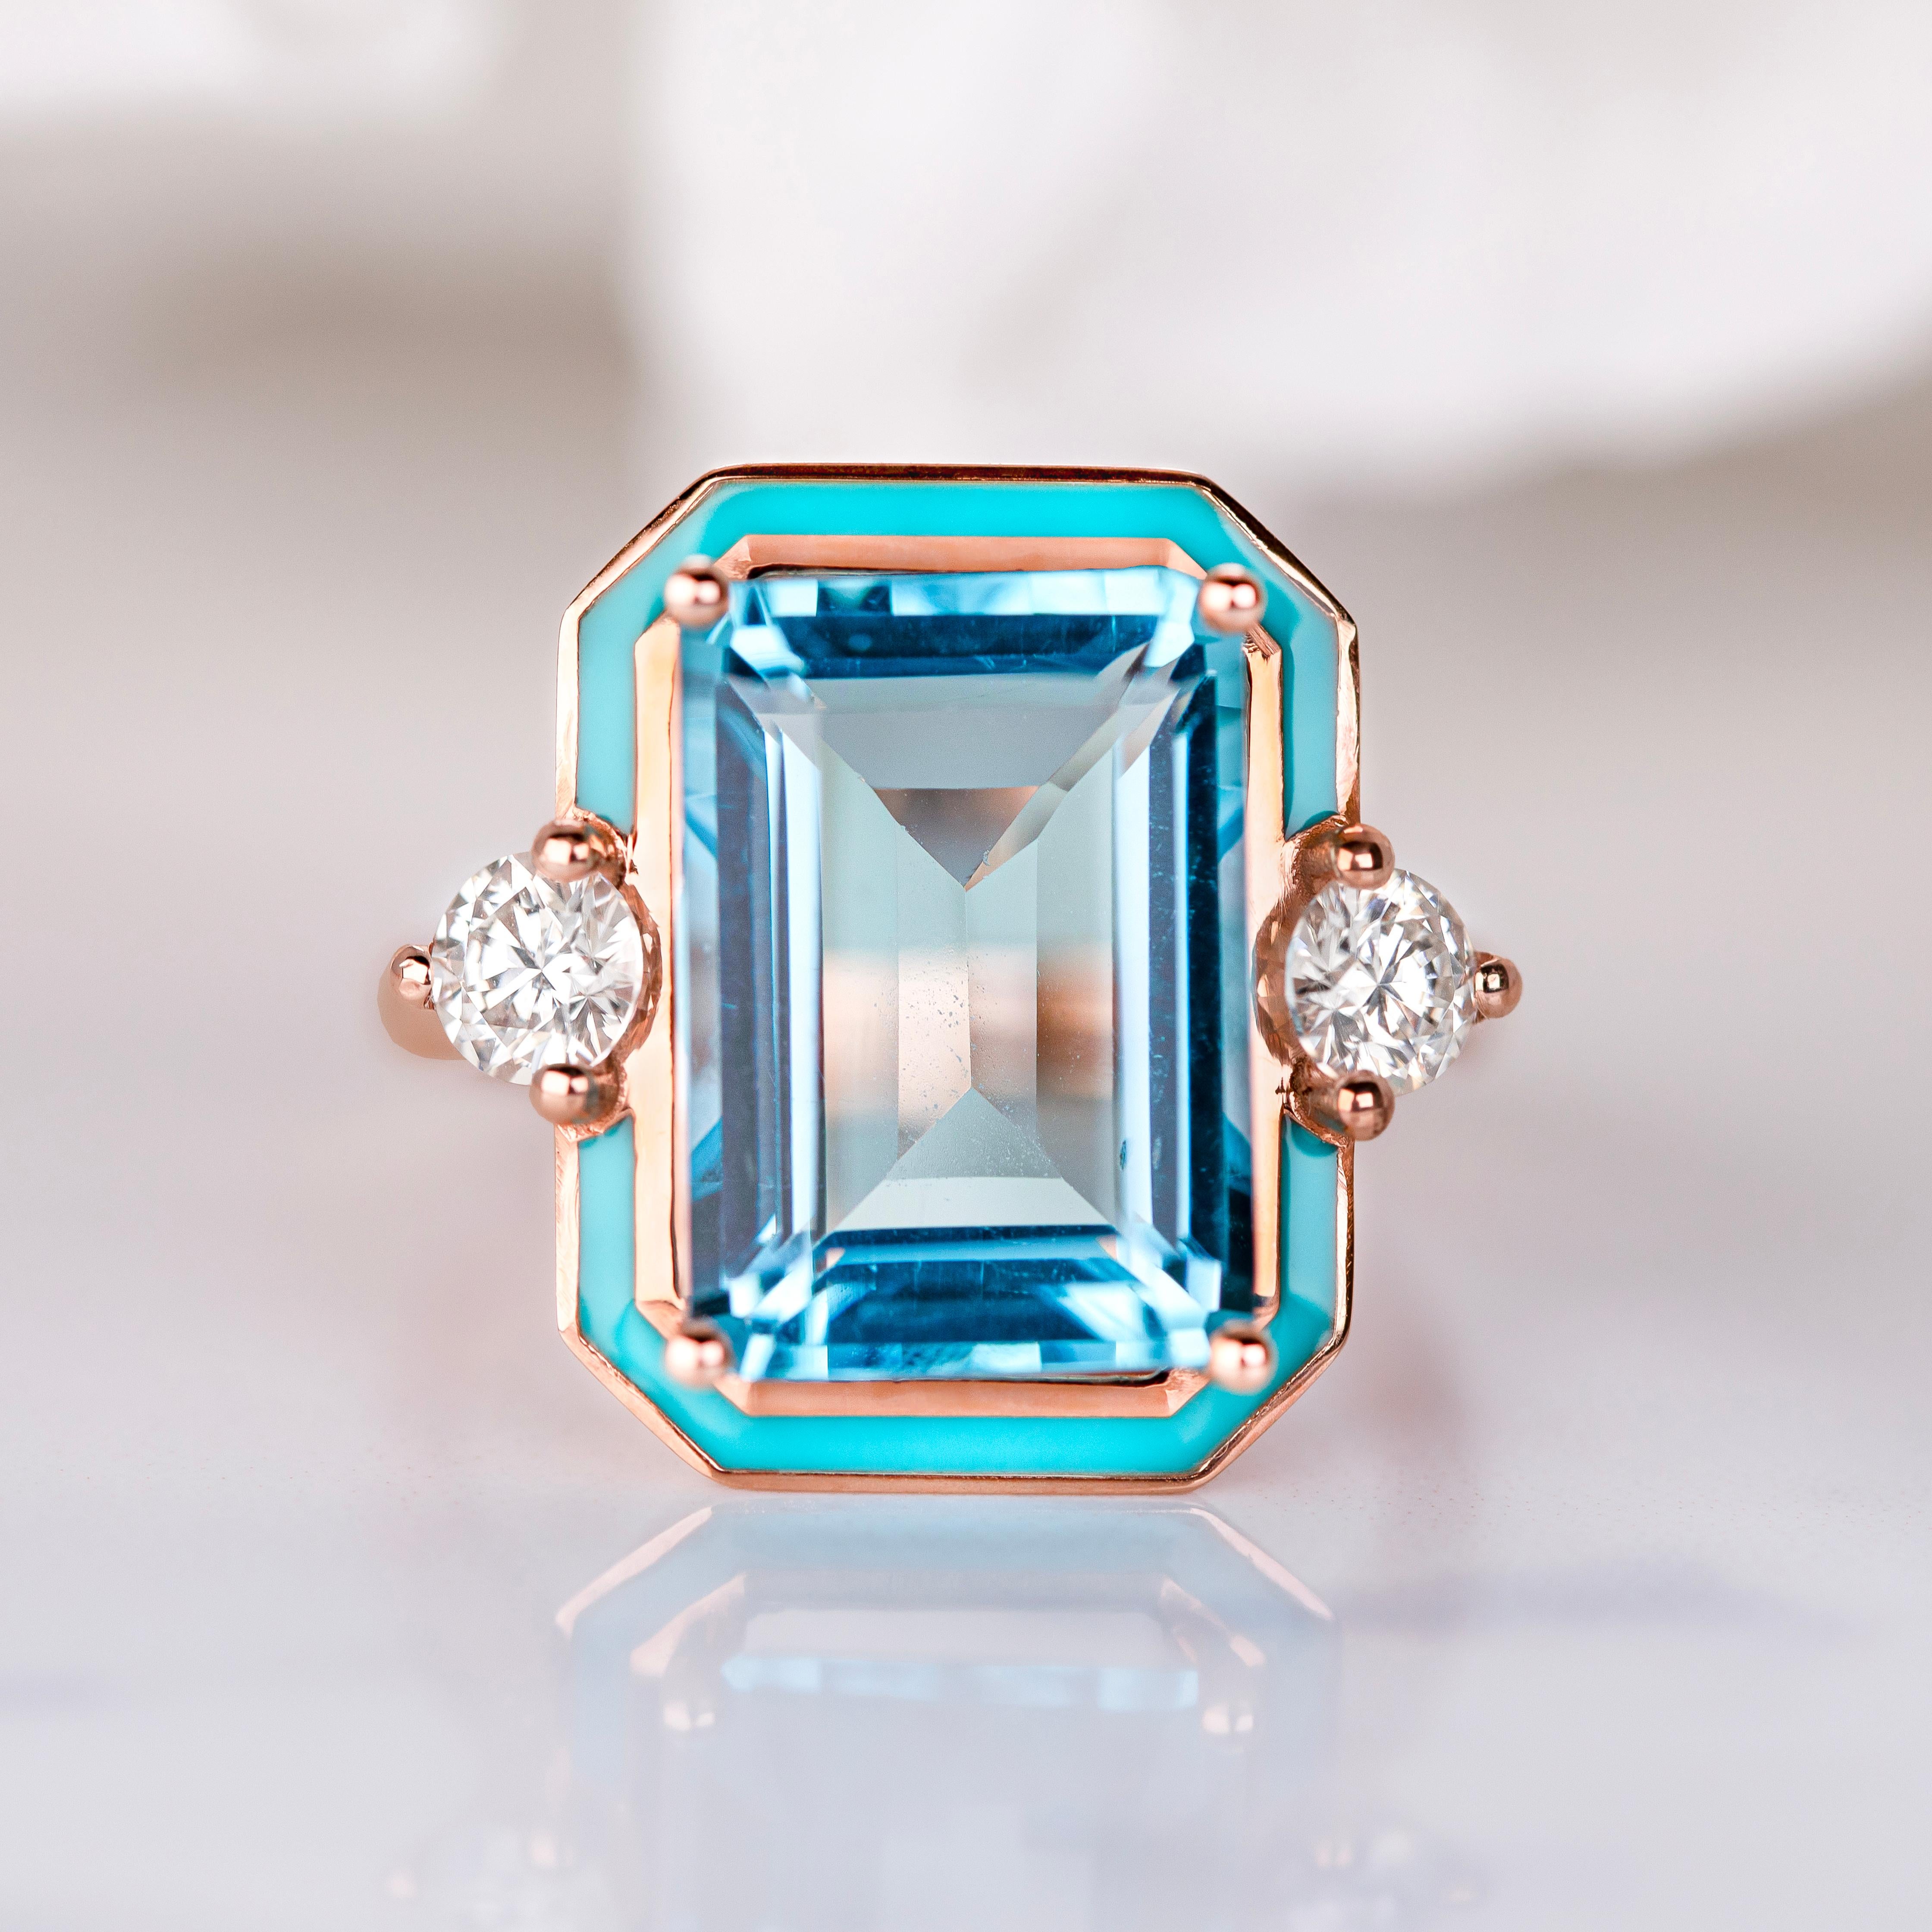 Art Deco Style Ring, Sky Topaz and Moissanite Stone Ring, 14K Gold Ring

This ring was made with quality materials and excellent handwork. I guarantee the quality assurance of my handwork and materials. It is vital for me that you are totally happy